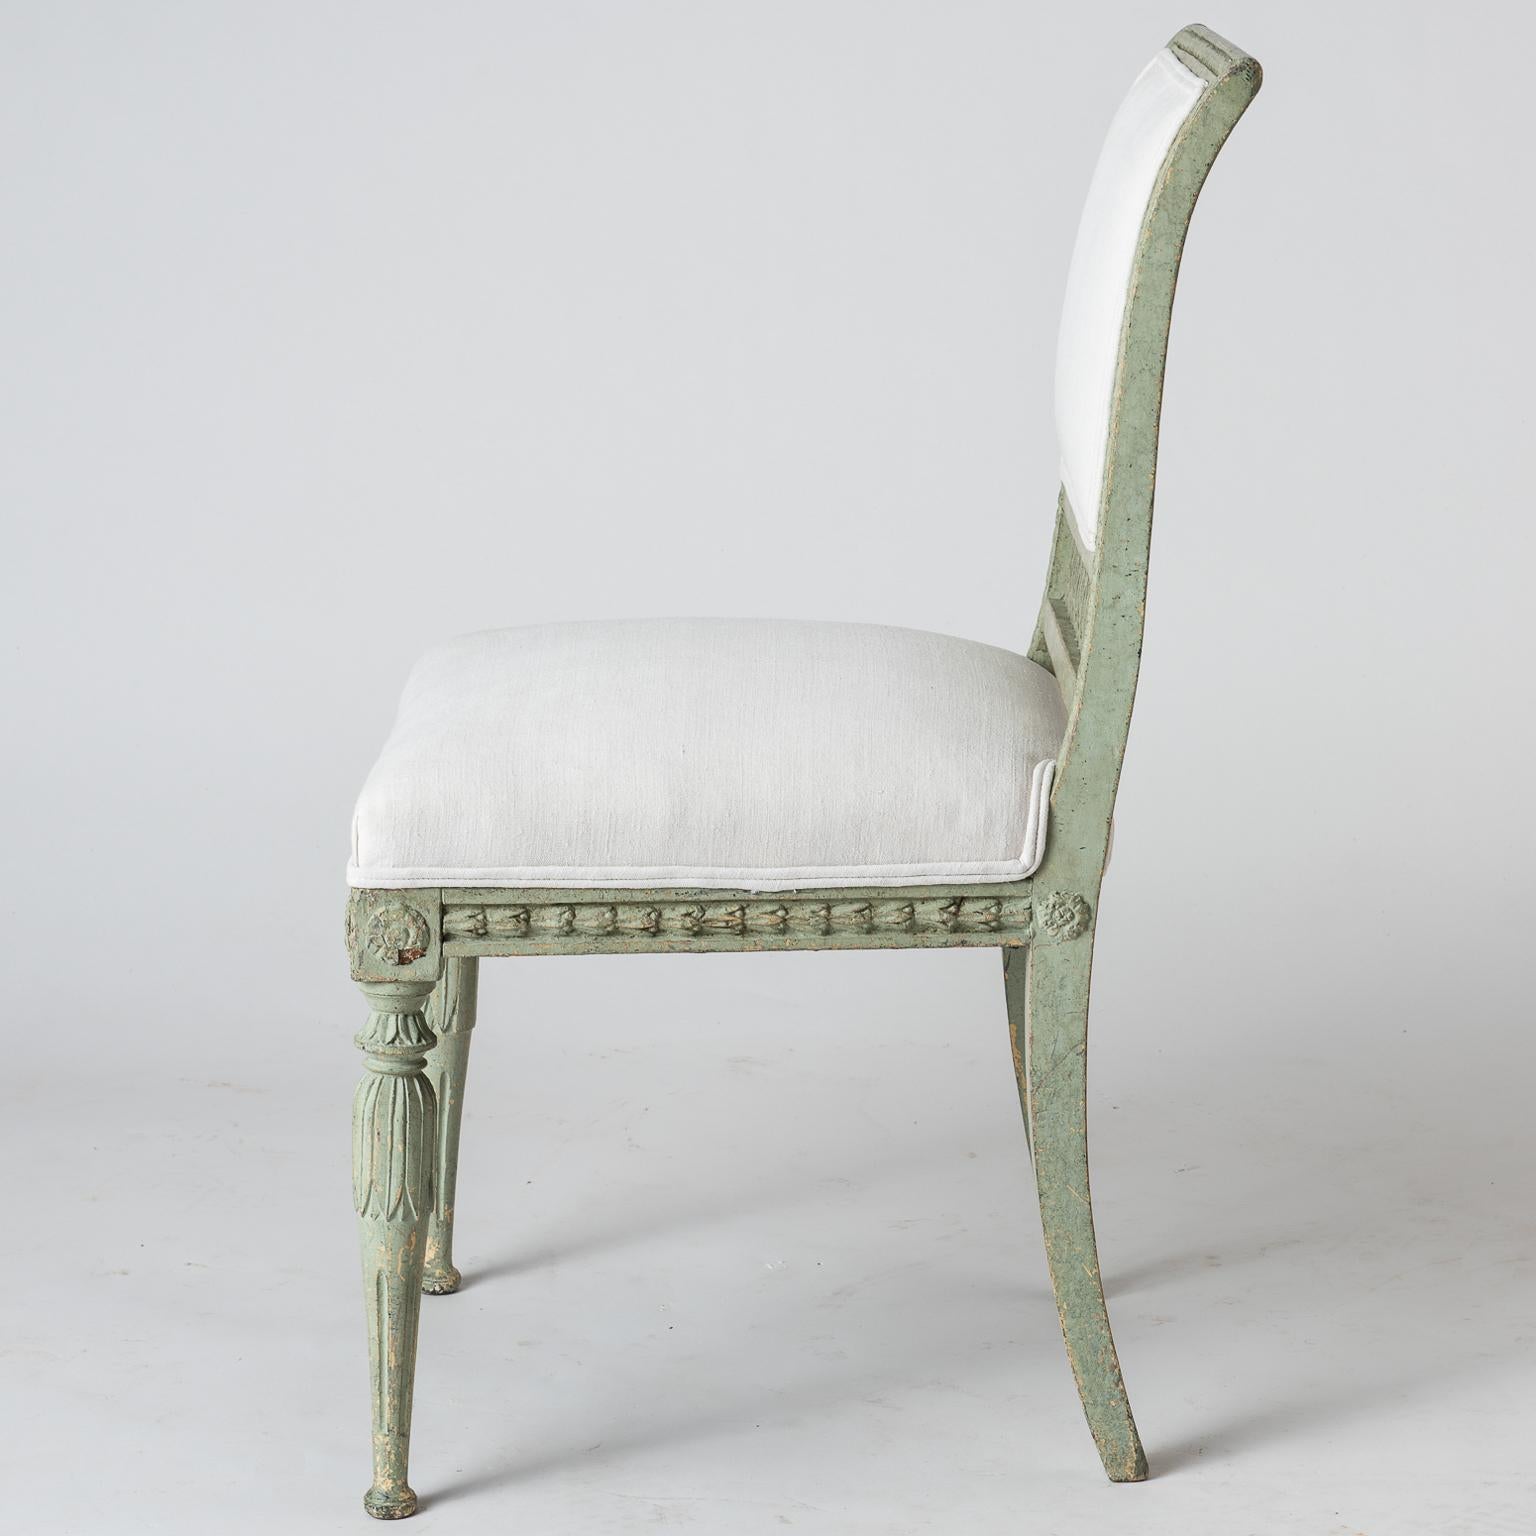 Pair of Swedish Gustavian Period Side Chairs in Old Green Paint, circa 1800 For Sale 3